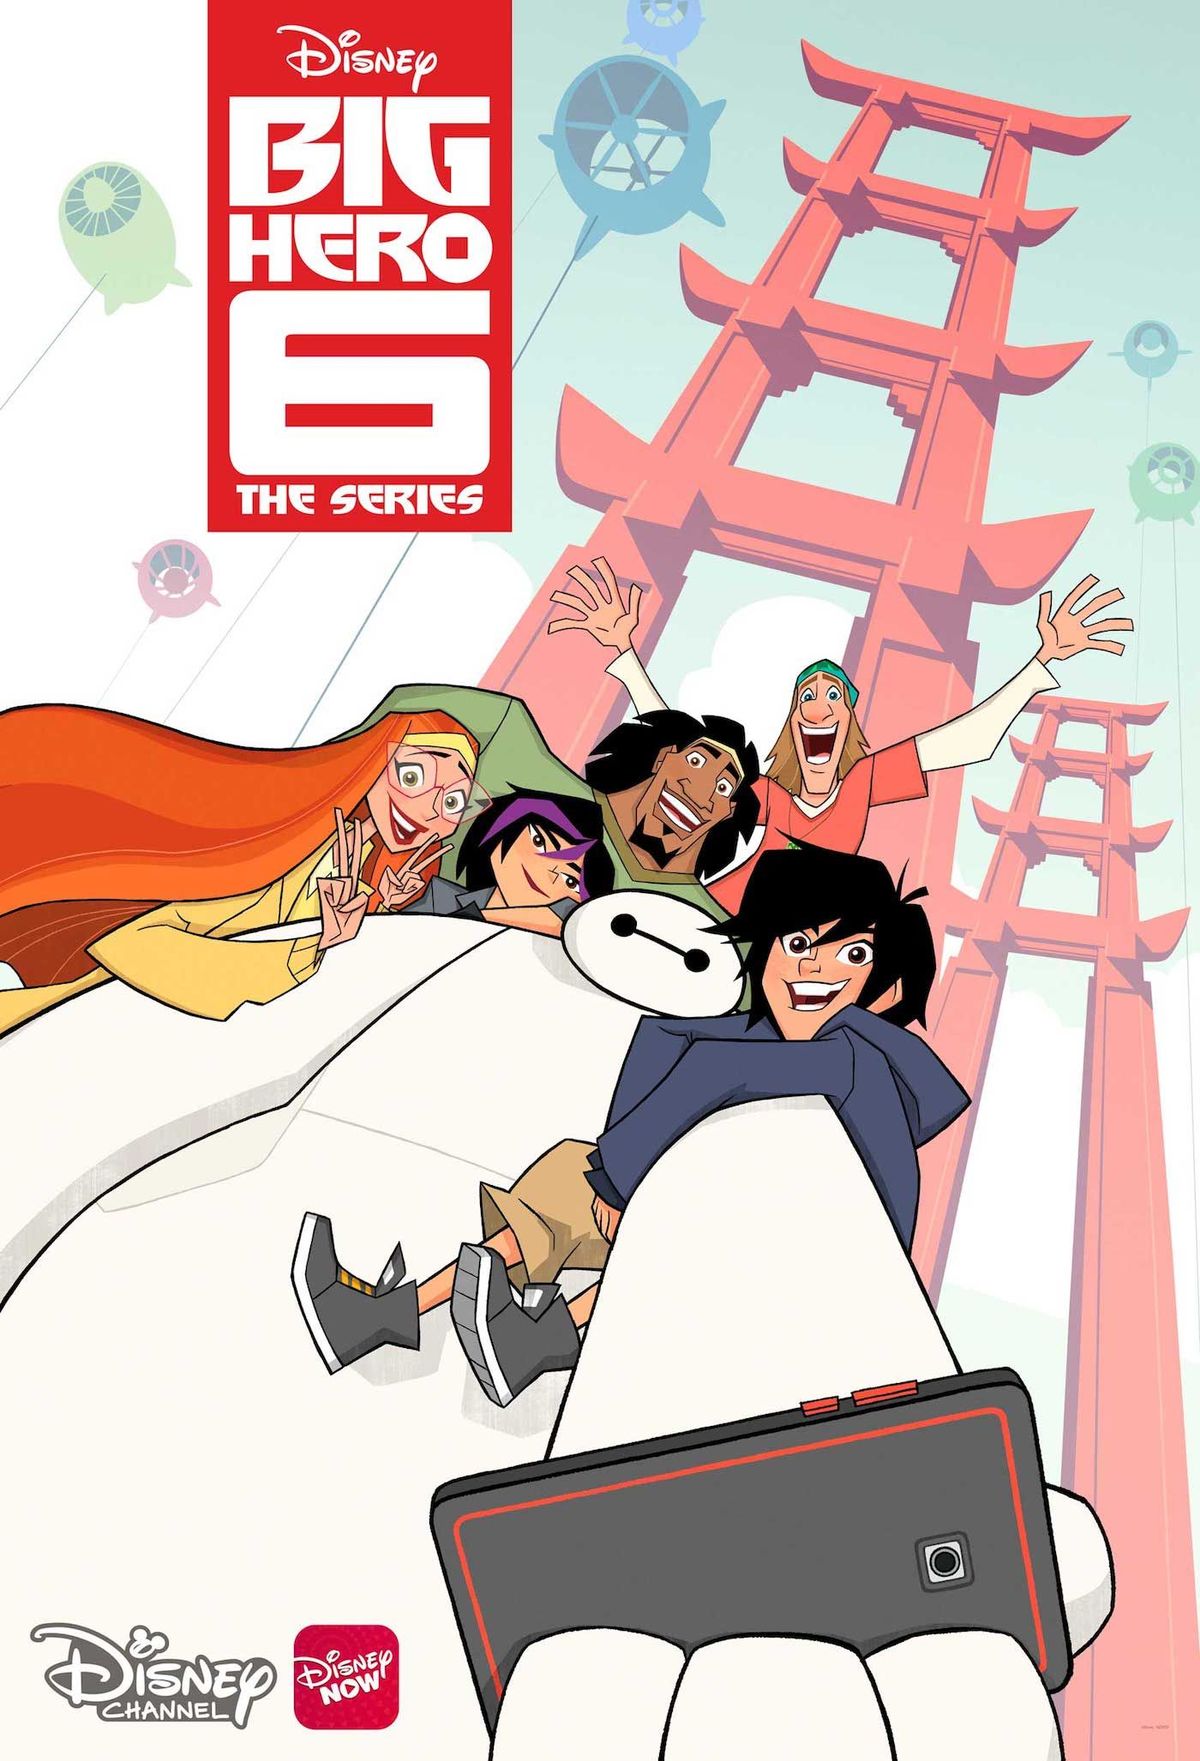 Big Hero 6: The Series Kicks Off With Weekend Event